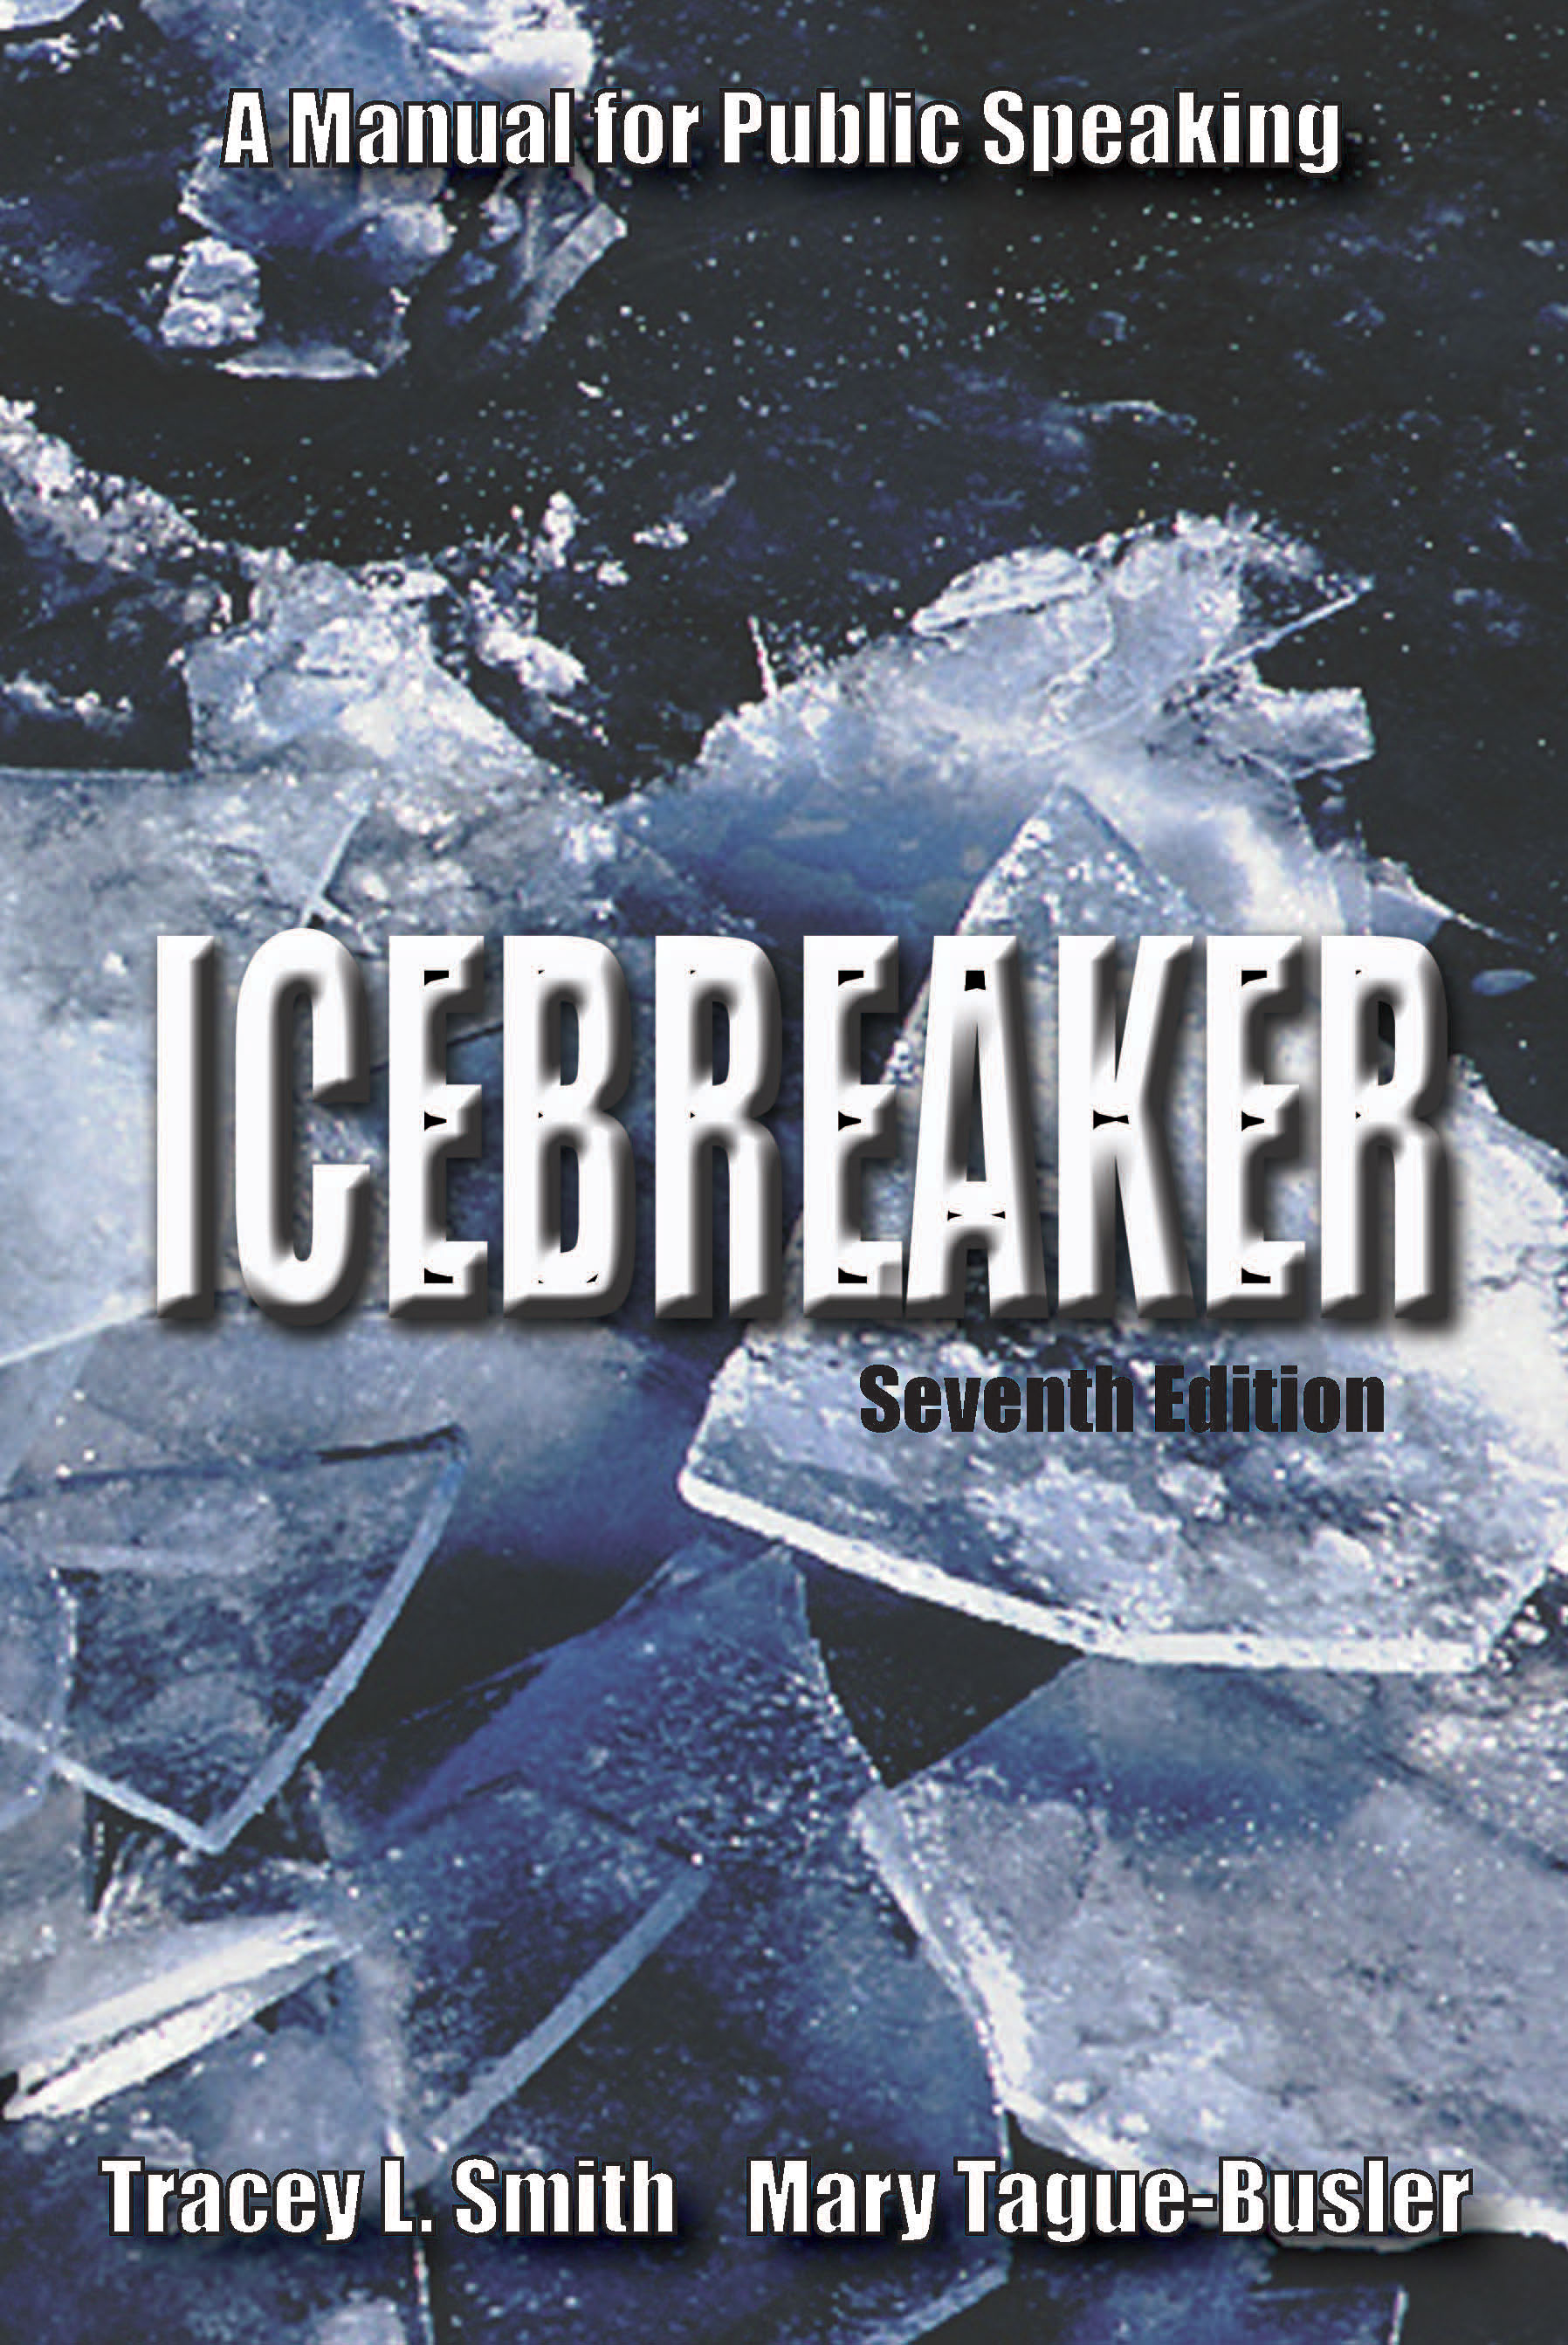 Icebreaker: A Manual for Public Speaking, Seventh Edition by Tracey L. Smith, Mary  Tague-Busler